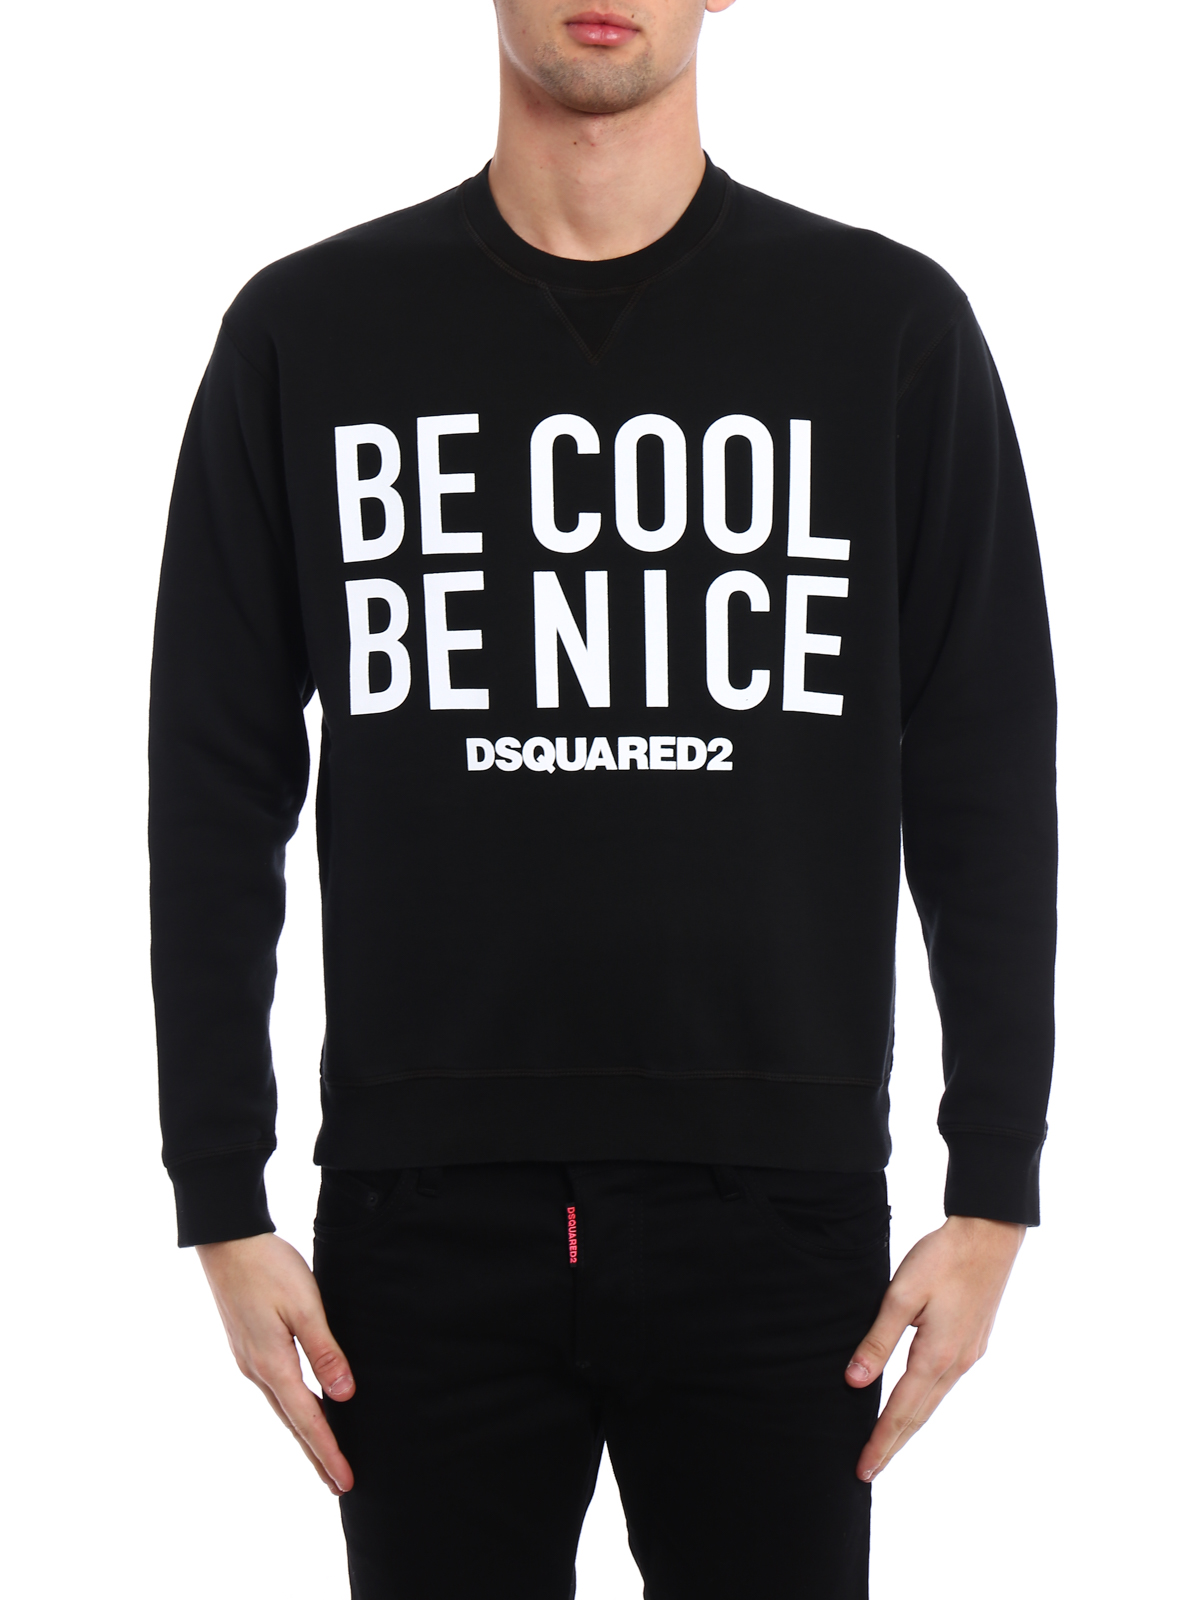 dsquared2 be cool be nice